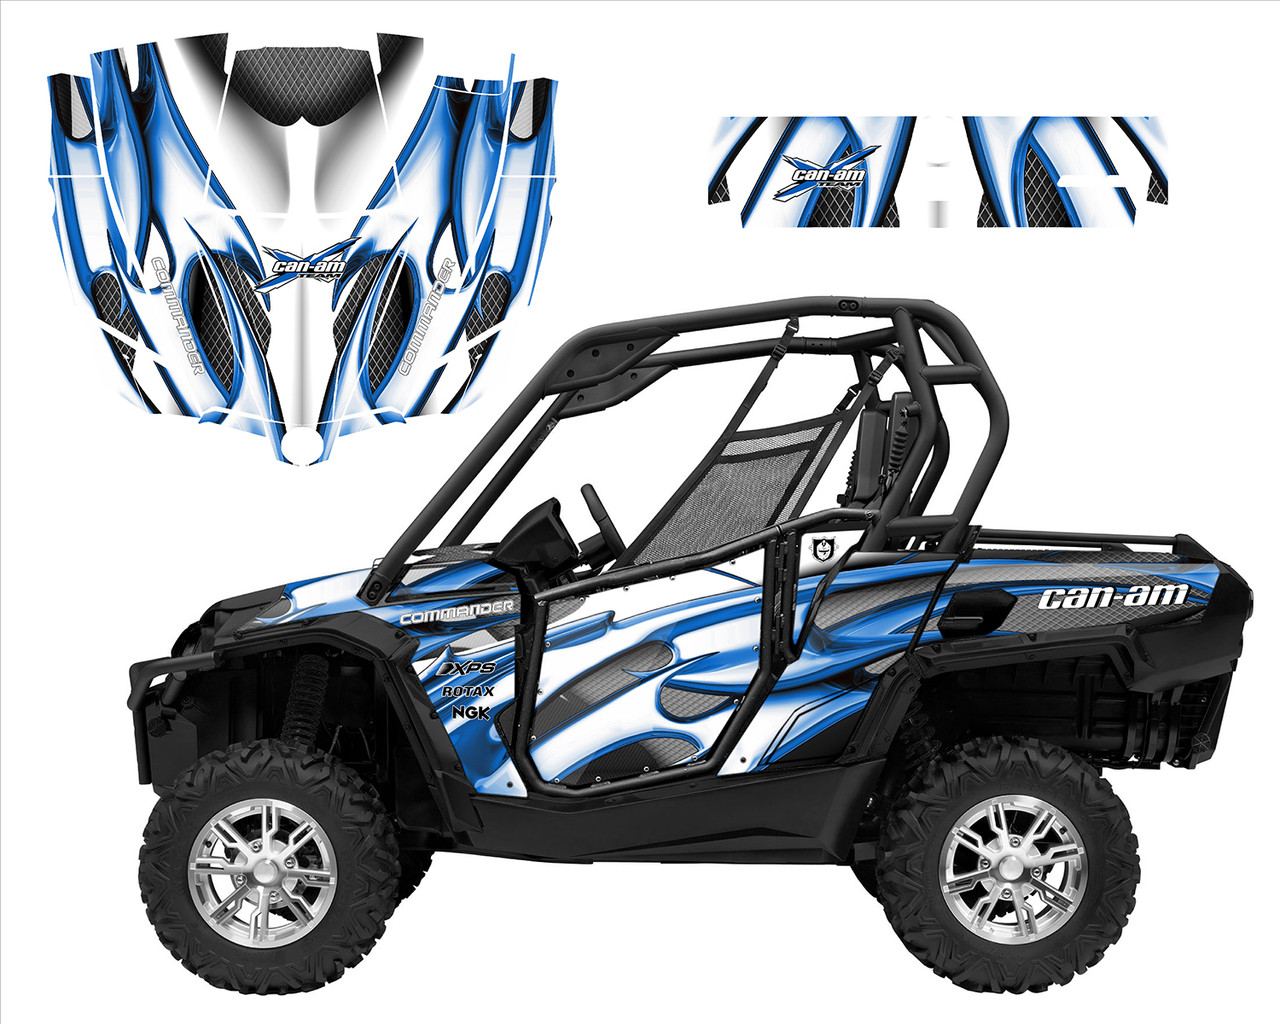 Can am Commander 1000 graphics designed by Allmotorgraphics